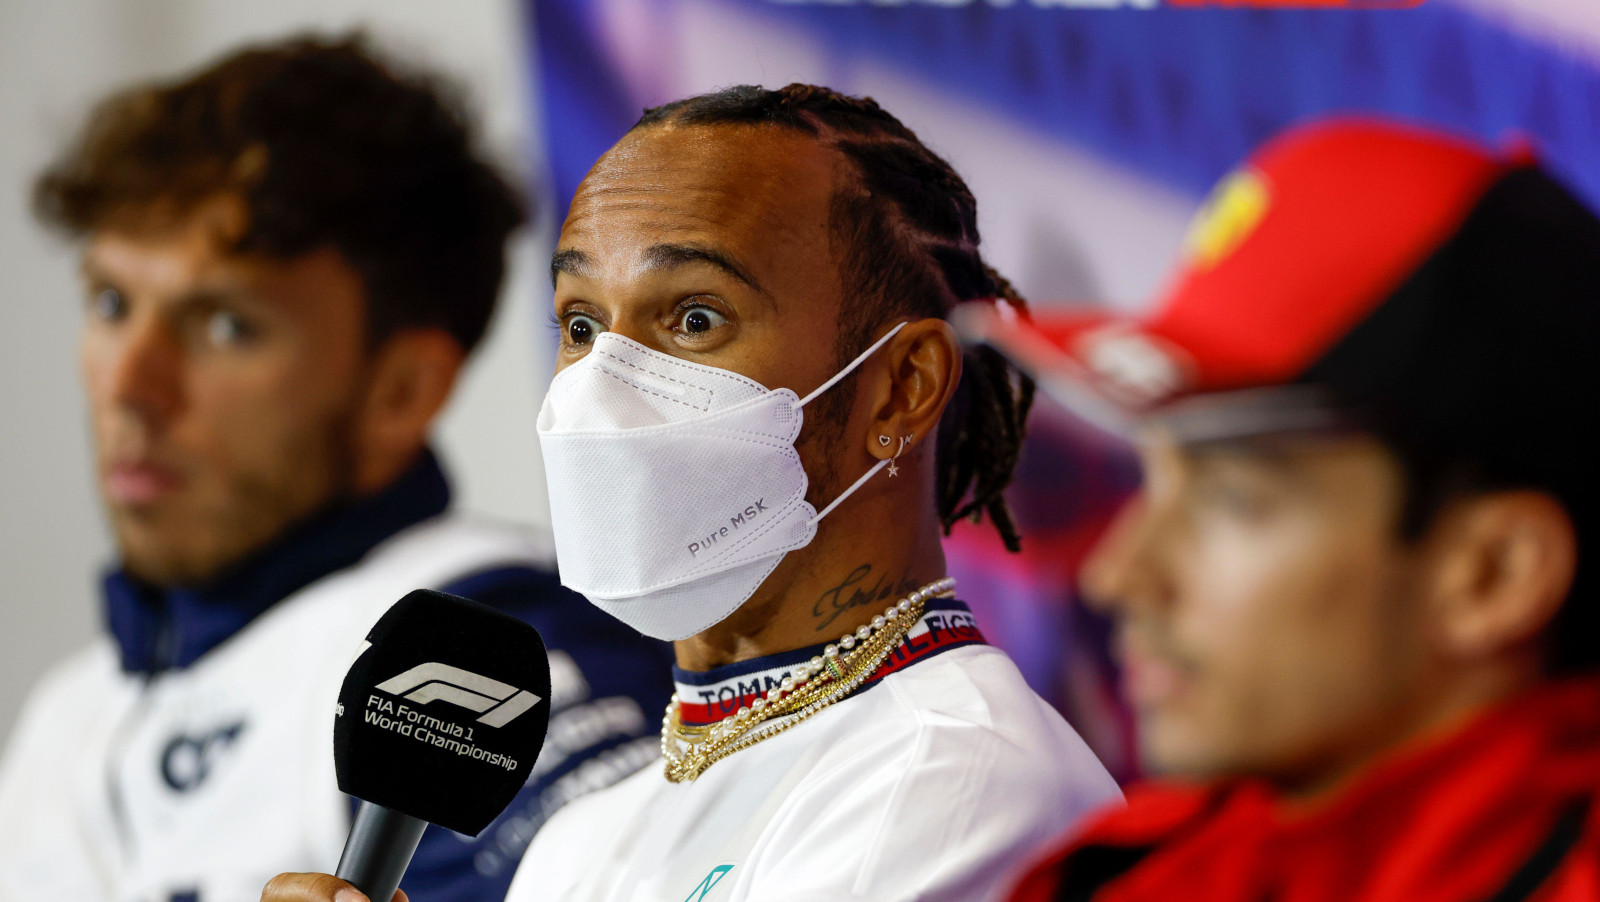 Lewis Hamilton in the press conference, surprised eyes. Silverstone July 2022